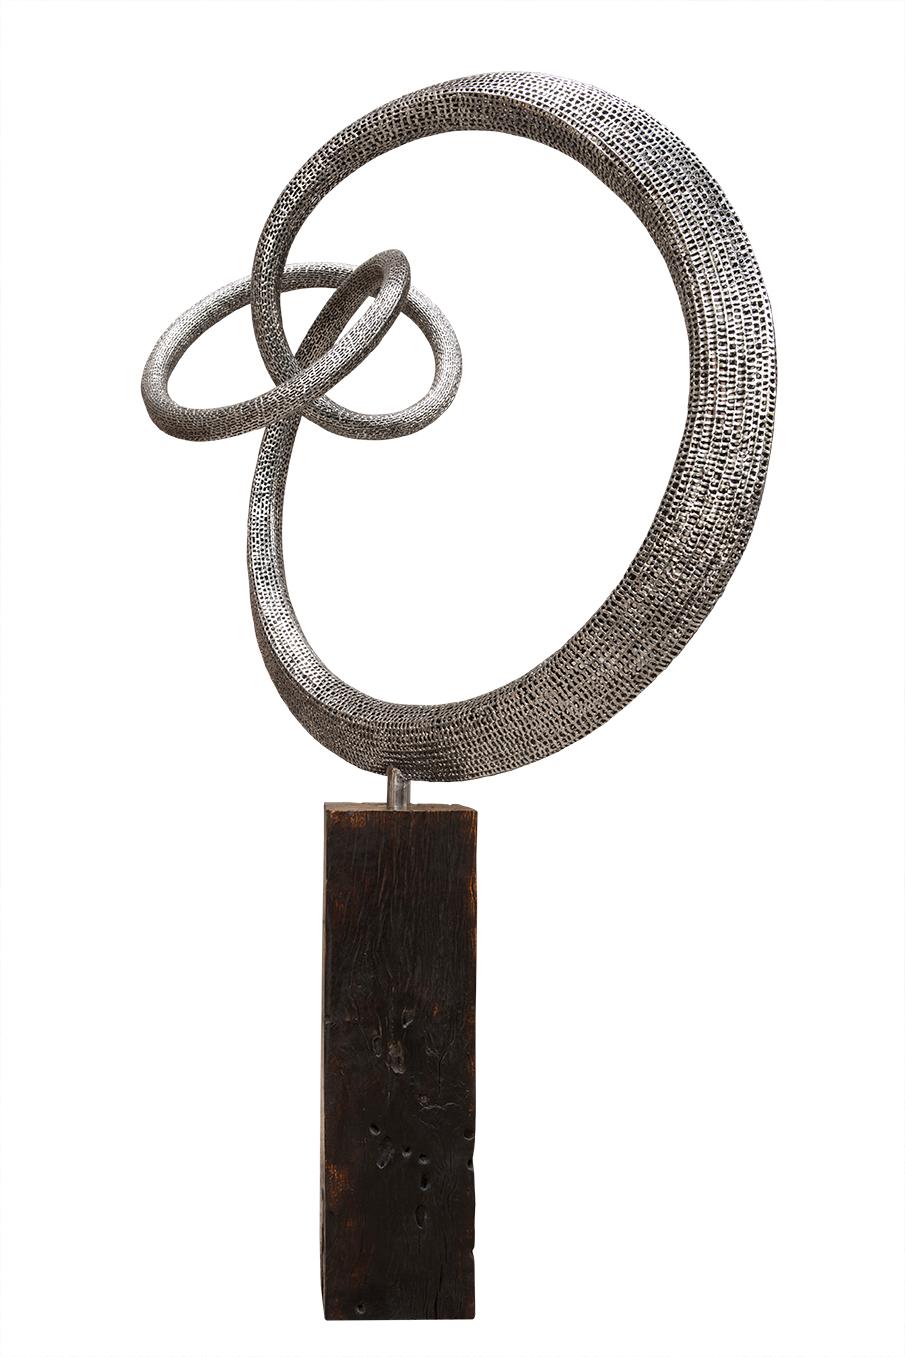 Oblivion - 21st Century, Contemporary, Abstract Sculpture, Stainless Steel 1